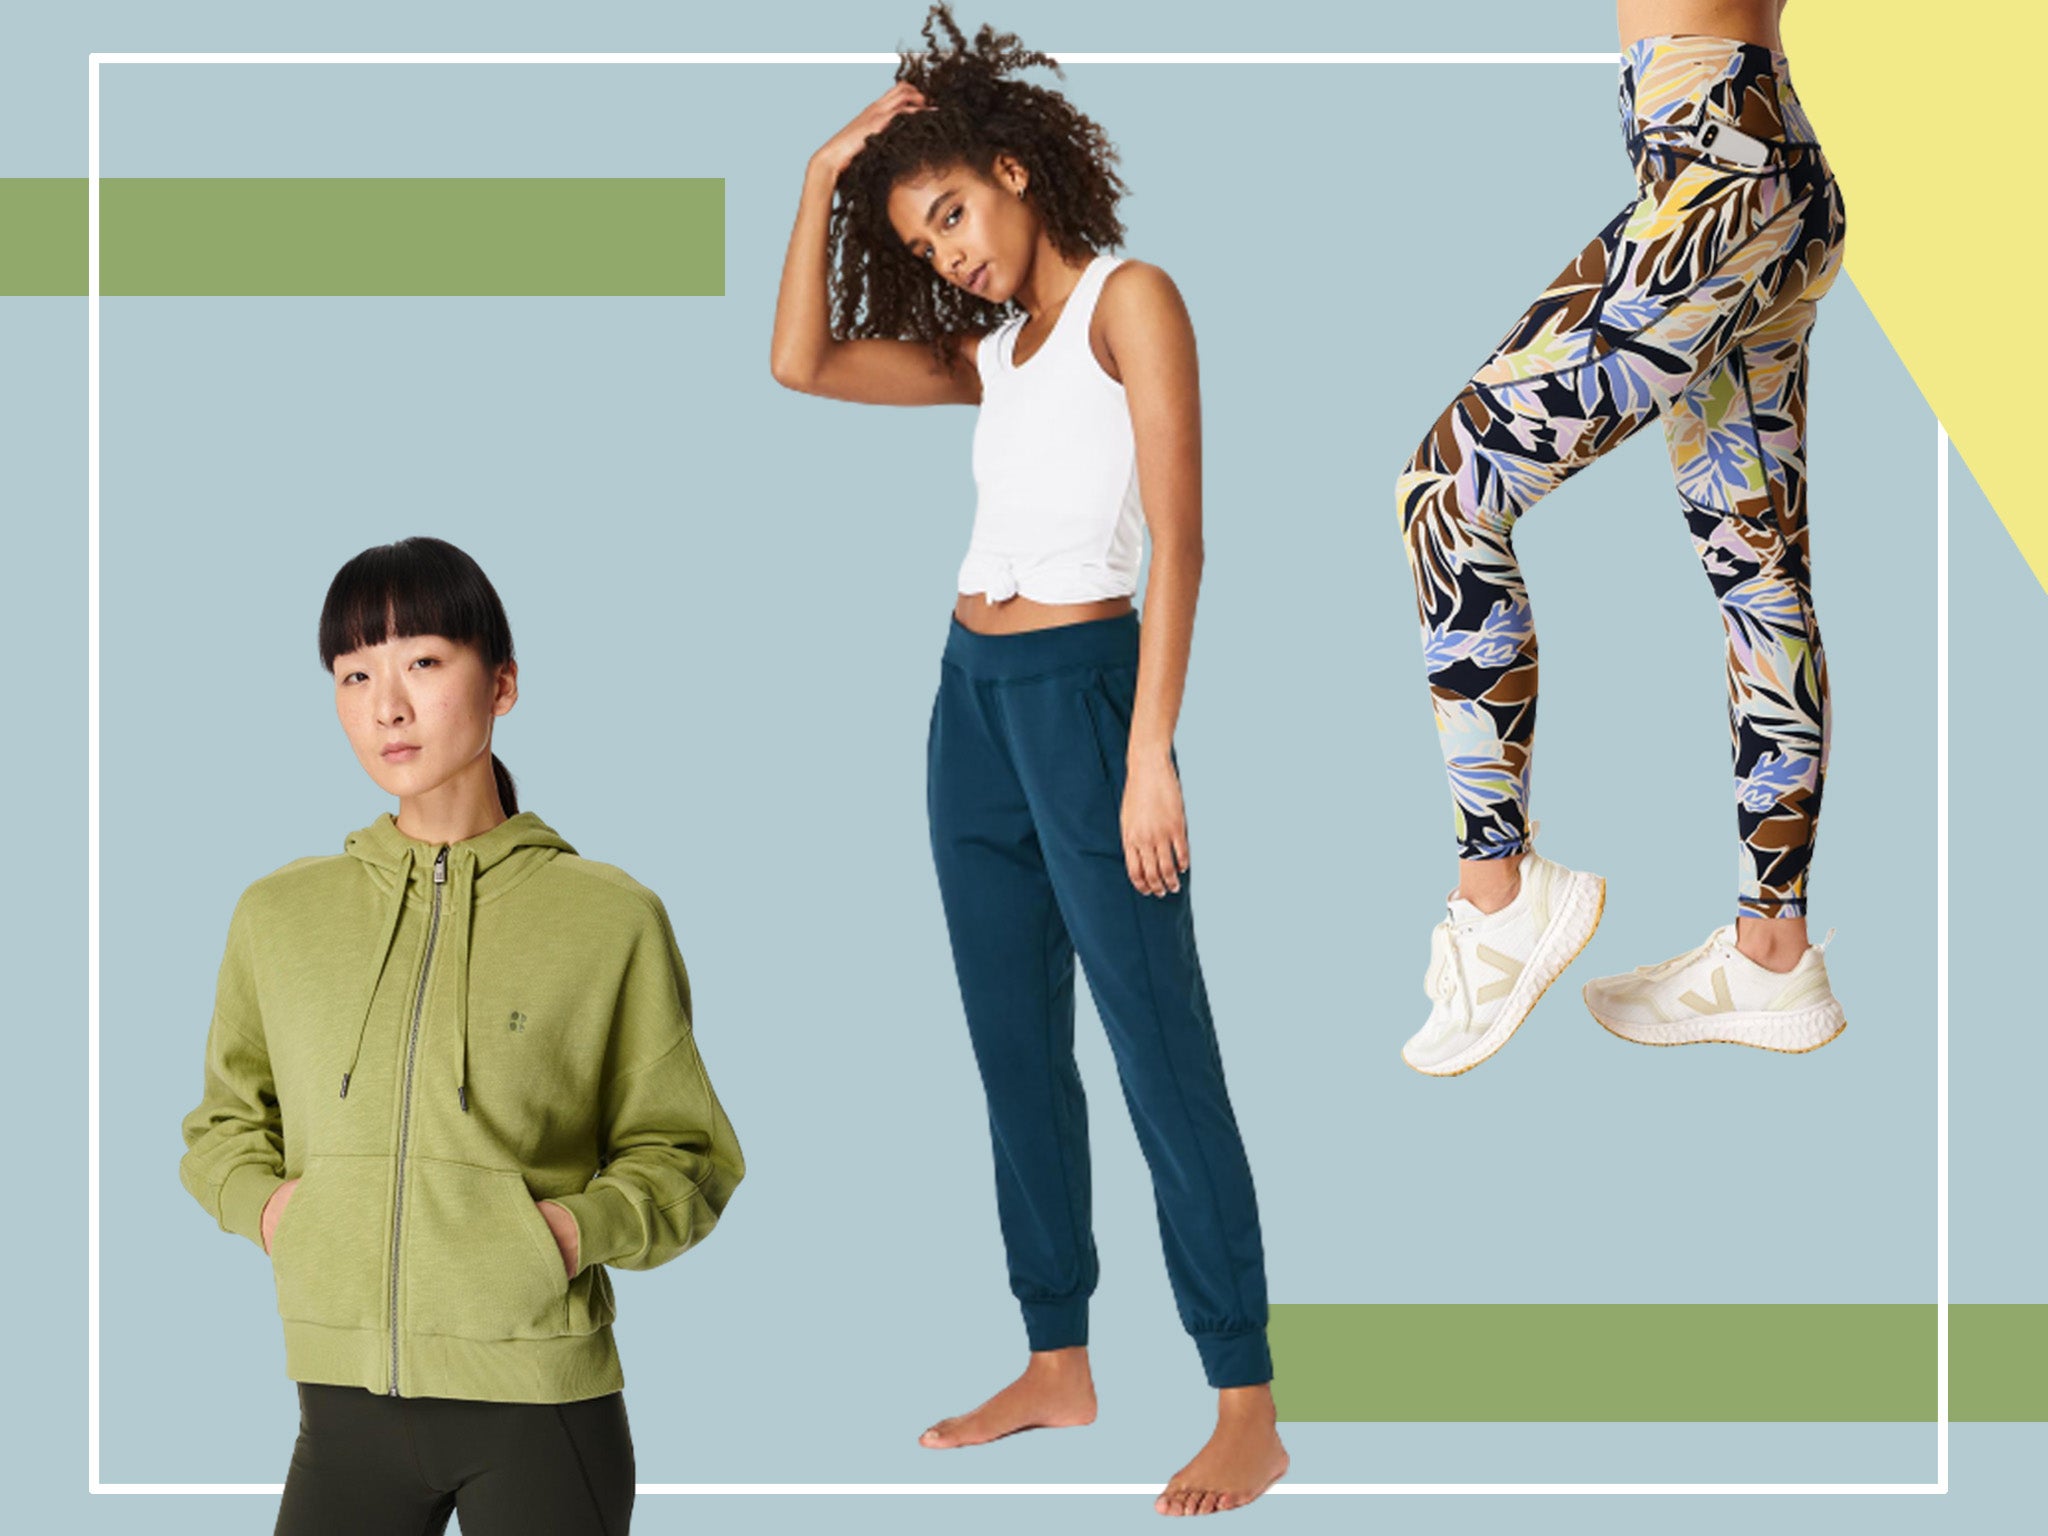 20% off Bras and Leggings Nike One At Least 20% Sustainable